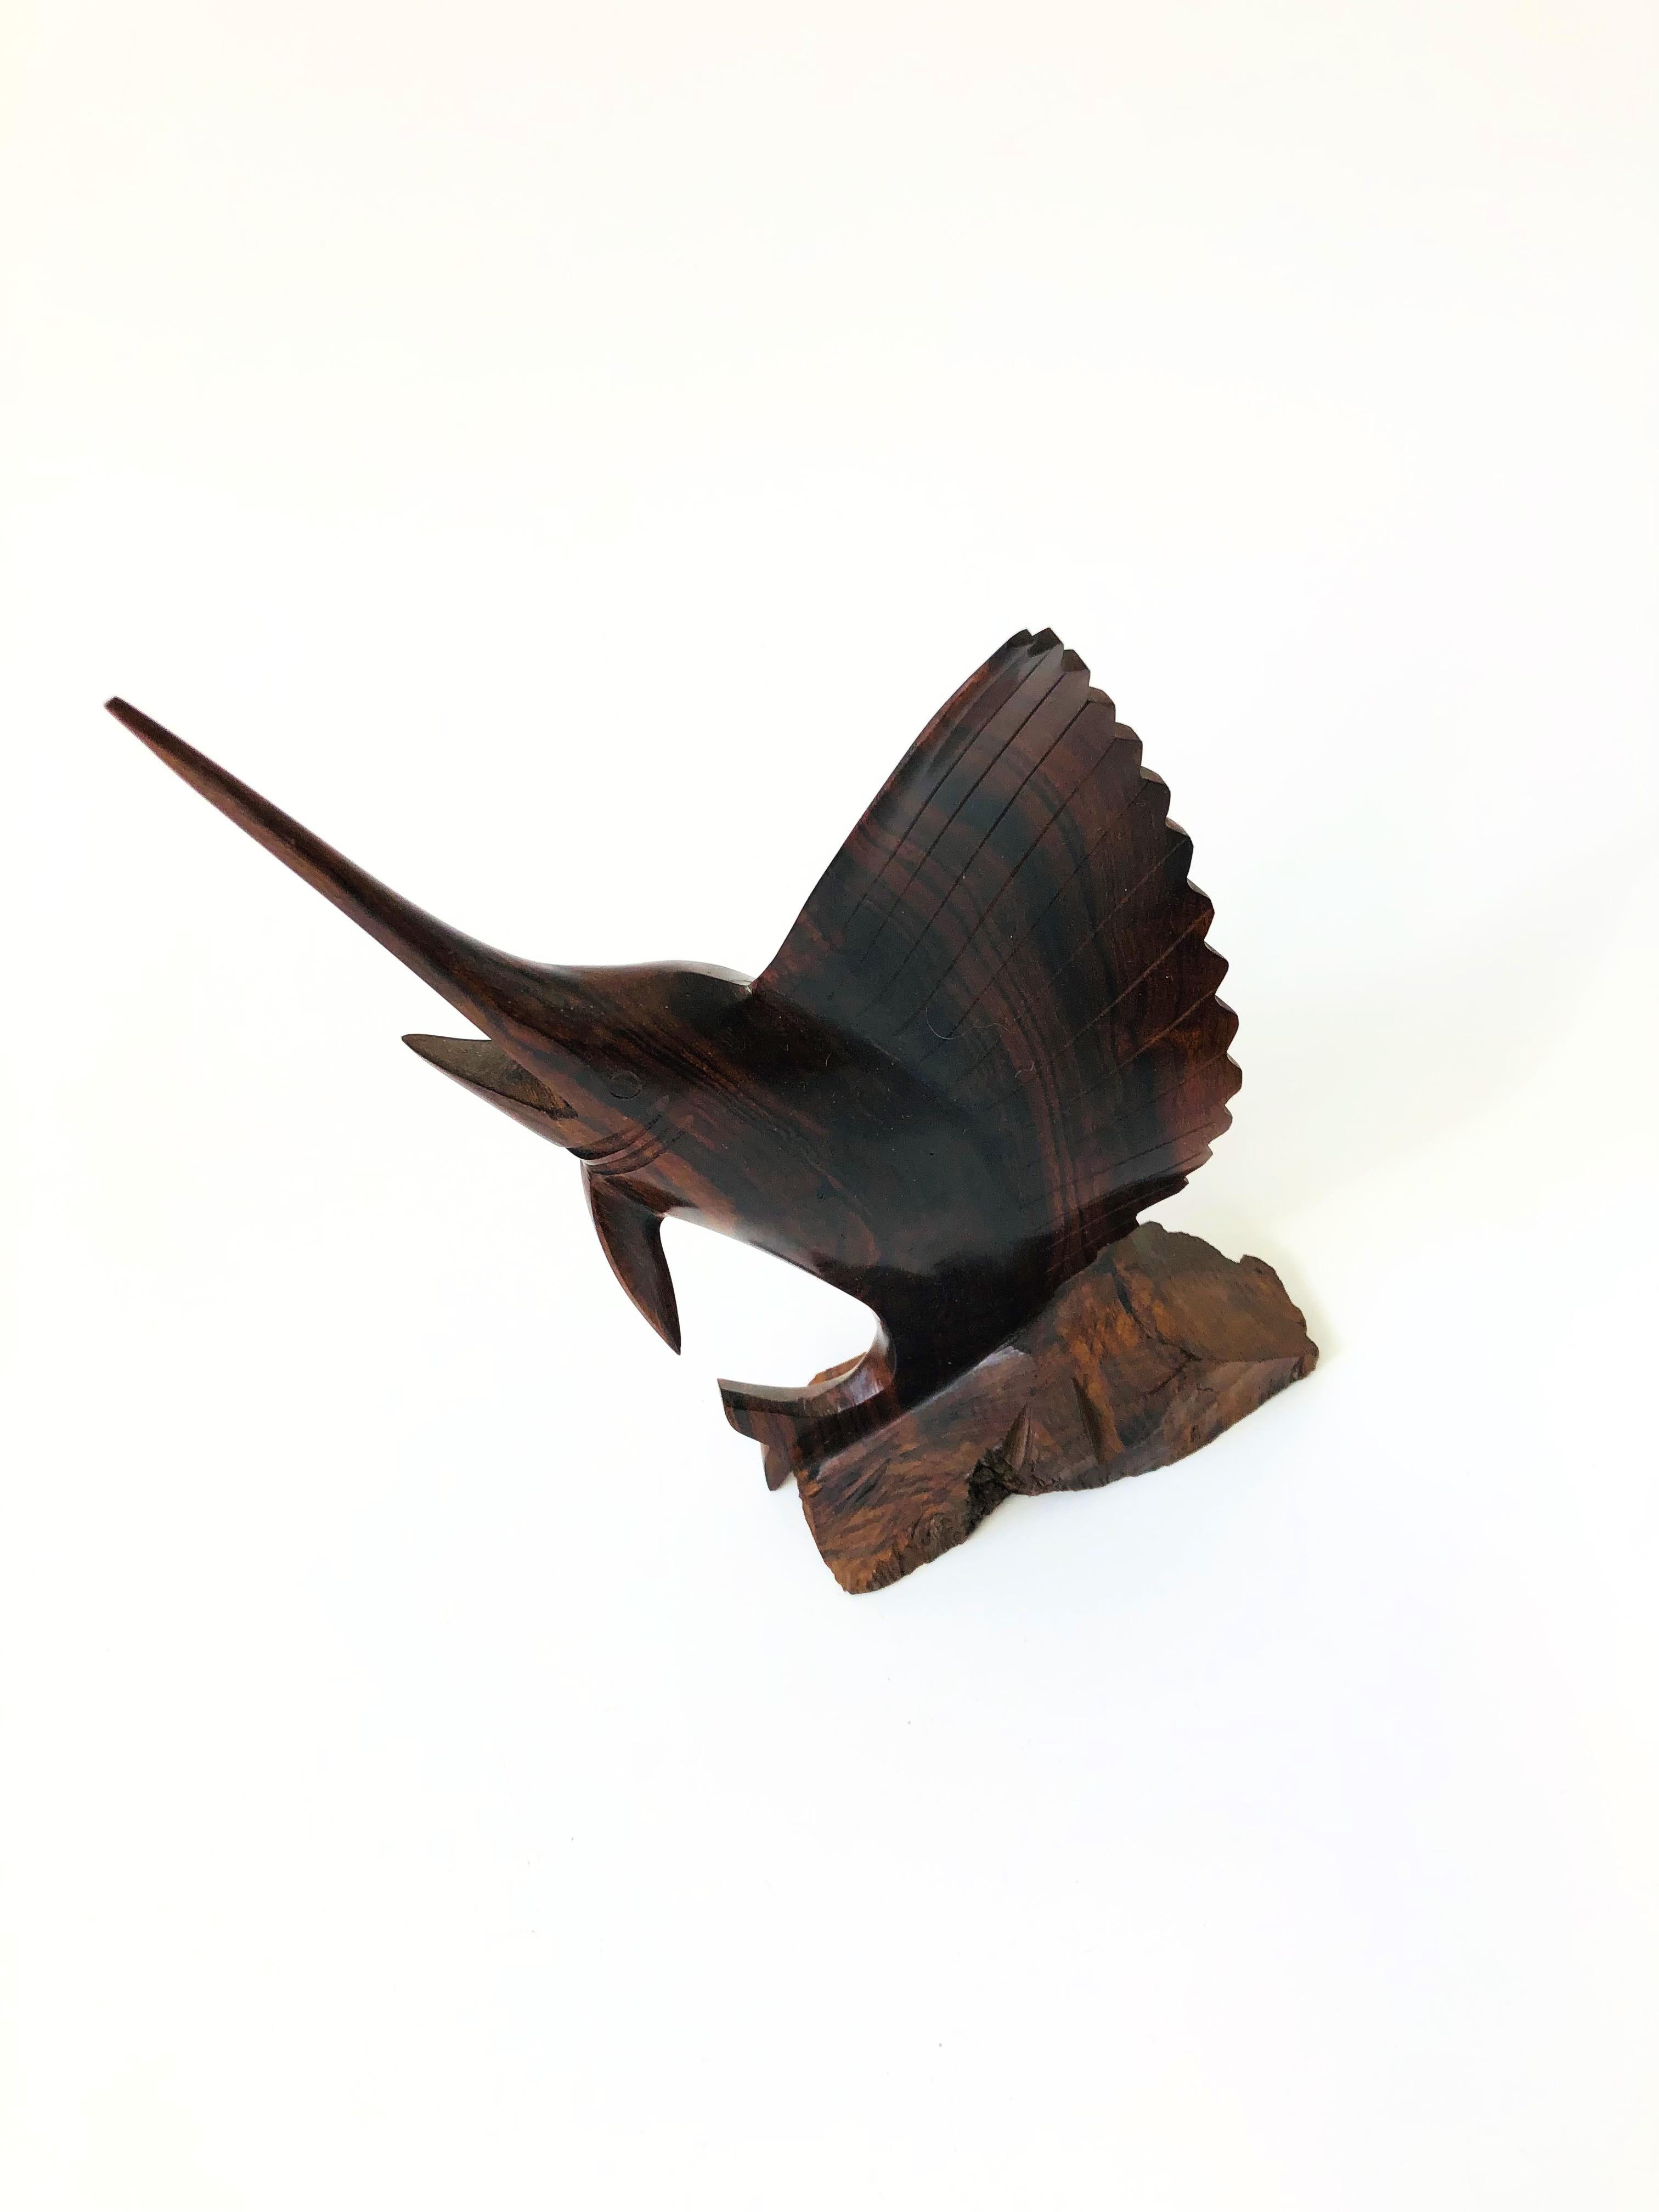 A vintage carved ironwood statue of a marlin. Great detailing to the fish's features with a lovely dark natural grain and smooth finish to the wood that contrasts nicely with a natural wood base.
 